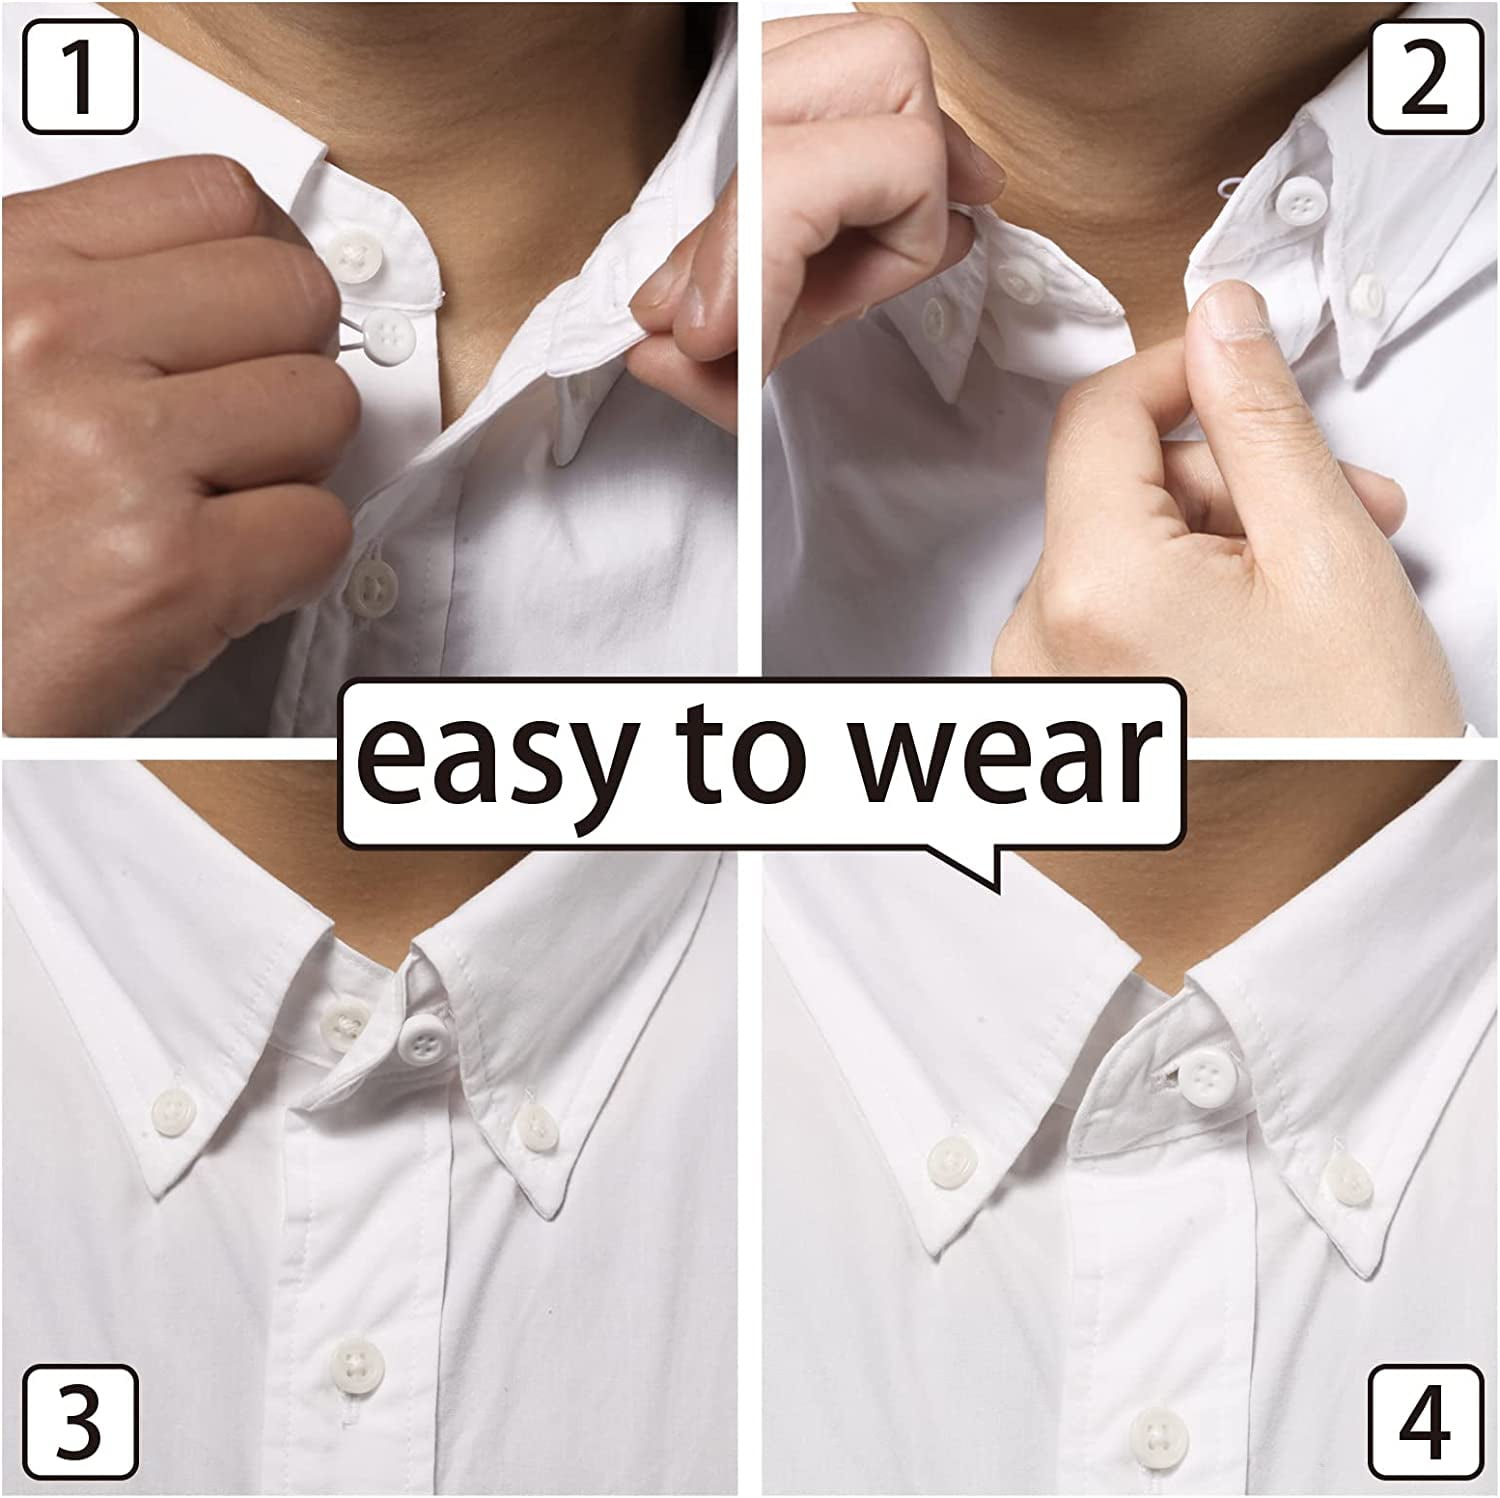 TRIANU 6Pcs Metal Collar Extenders Stretch Neck Extender for 1/2 Size  Expansion of Men Dress Shirts, White